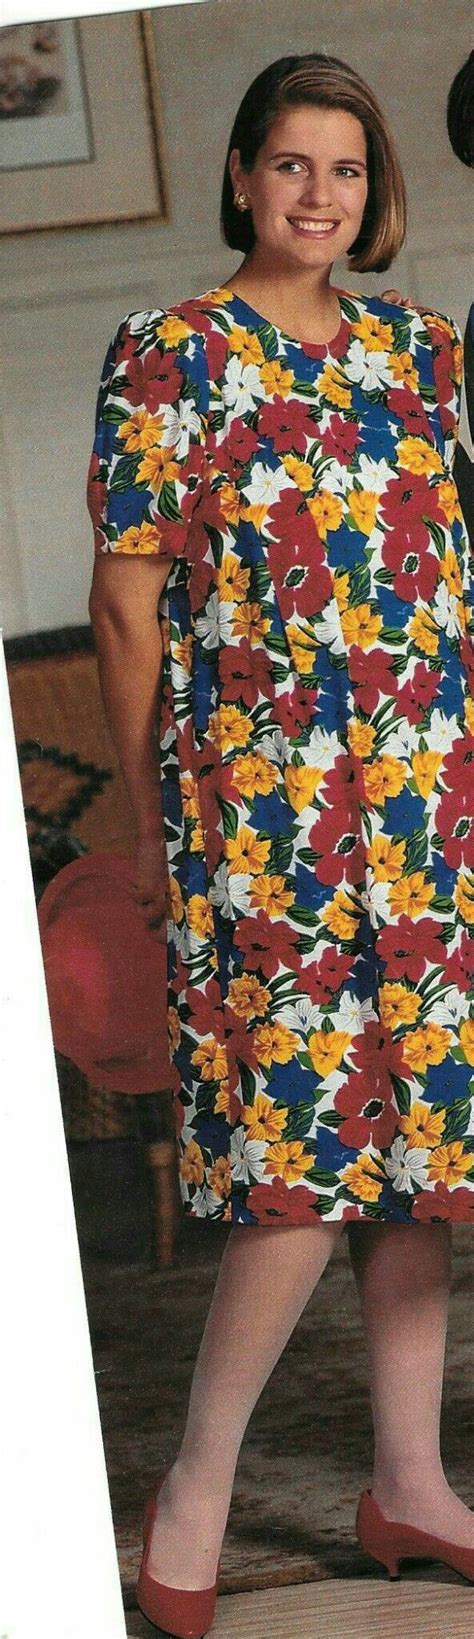 Pin By Mark On My Lovely Jcpenney Models 80s Fashion 80s Women